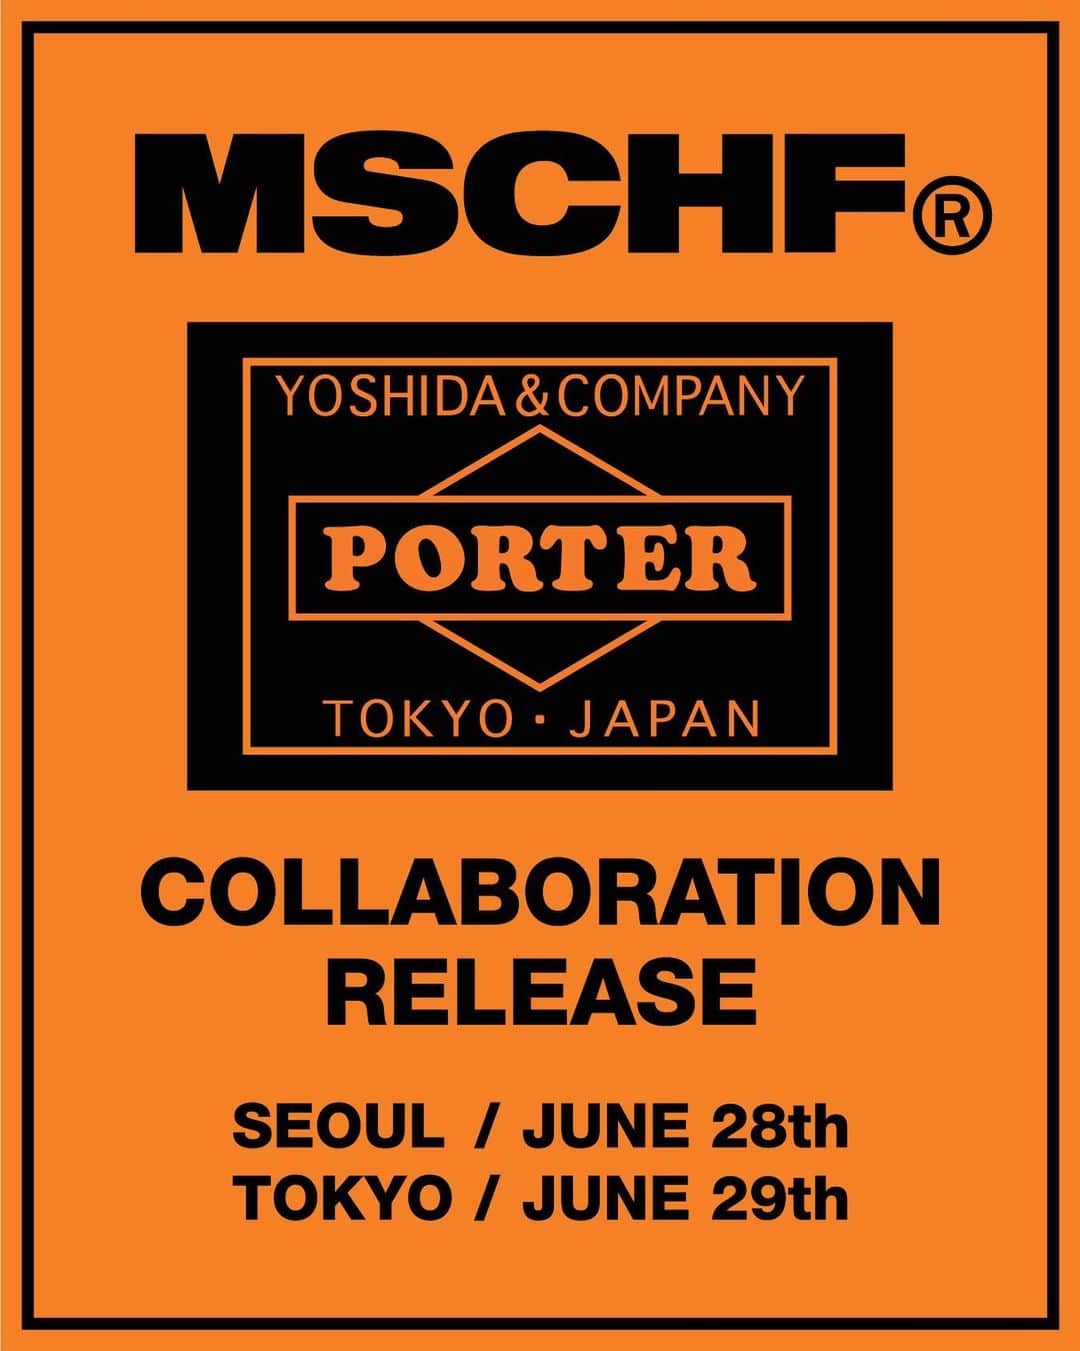 PORTER STANDさんのインスタグラム写真 - (PORTER STANDInstagram)「韓国・ソウル発のウィメンズストリートブランド「MISCHIEF」とのコラボレーションアイテムを発売します。  2010年に韓国のデザイナー、Seo Ji Eun（ソ・ジウン）とJung Ji Yoon（チョン・ジユン）が立ち上げた「MISCHIEF（ミスチーフ）」。90年代のストリートファッションをコンセプトに、モダンかつシンプルなデザインに昇華したアイテムを展開しています。最近ではNIKE・VANS・Girls Don’t Cryなどとコラボレーションを行い、韓国国内のみならず、海外でも注目を集めています。  今回発売するのは、PORTERのアイテムの中からMISCHIEFがセレクトしたブックバッグ・ショルダーバッグ・ウォレットの3型です。各型には本体カラーと同色のアイコニックな「MSCHF®」ブランドロゴの刺繍を施し、MISCHIEFらしいデザインに仕上げています。 こちらのアイテムは、PORTER STAND 品川駅店、PORTER SEOUL GANGNAM・HANNAM・GAROSUのみでの限定発売です。 〈PORTER SEOUL GANGNAM・HANNAM・GAROSU〉 発売日：6月28日（金） 〈PORTER STAND 品川駅店〉 発売日：6月29日（土）  MISCHIEF×PORTER ブックバッグ ￥20,800（税別） ショルダ－バッグ ￥16,500（税別） ウォレット ￥12,500（税別）  この機会に是非店頭でご覧ください。 皆様のお越しを心よりお待ちしております。  We’re launching the collaboration items with “MISCHIEF”, the women’s street brand from Seoul, Korea. “MISCHIEF” is a women’s street brand that was established in 2010 by Korean designers Seo Ji Eun and Jung Ji Yoon. They offer modern but simple look items based on the street fashion in 90s. They have been drawing more attention all over the world by collaborating with NIKE, VANS, and Girls Don’t Cry.  For the collaboration items, we’re selling SHOULDER BAG(L), SHOULDER BAG(S), and WALLET, which MISCHIEF selected from PORTER items.  For each item, we embroidered iconic “MSCHF®” brand logo whose color is the same as the body to make it more MISCHIEF-style.  Only available at PORTER STAND SHINAGAWA, PORTER SEOUL GANGNAM・HANNAM・GAROSU. 〈PORTER SEOUL GANGNAM・HANNAM・GAROSU〉 Launch date ：June 28th (Fri) 〈PORTER STAND SHINAGAWA〉 Launch date：June 29th（Sat）  MISCHIEF×PORTER BOOK BAG ￥20,800（plus tax） SHOULDER BAG ￥16,500（plus tax） WALLET ￥12,500（plus tax）  Please stop by on this occasion. We are sincerely looking forward to your visit.  #yoshidakaban #porter #porteryoshida #madeinjapan#japan #tokyo #porterstand #shinagawa #trunkshow#mischief #mschf #mschfgirl #korea #seoul#mschfxporter #mschf2019ss #요시다가방 #포터 #미스치프#미스치프걸」6月21日 18時22分 - porter_stand